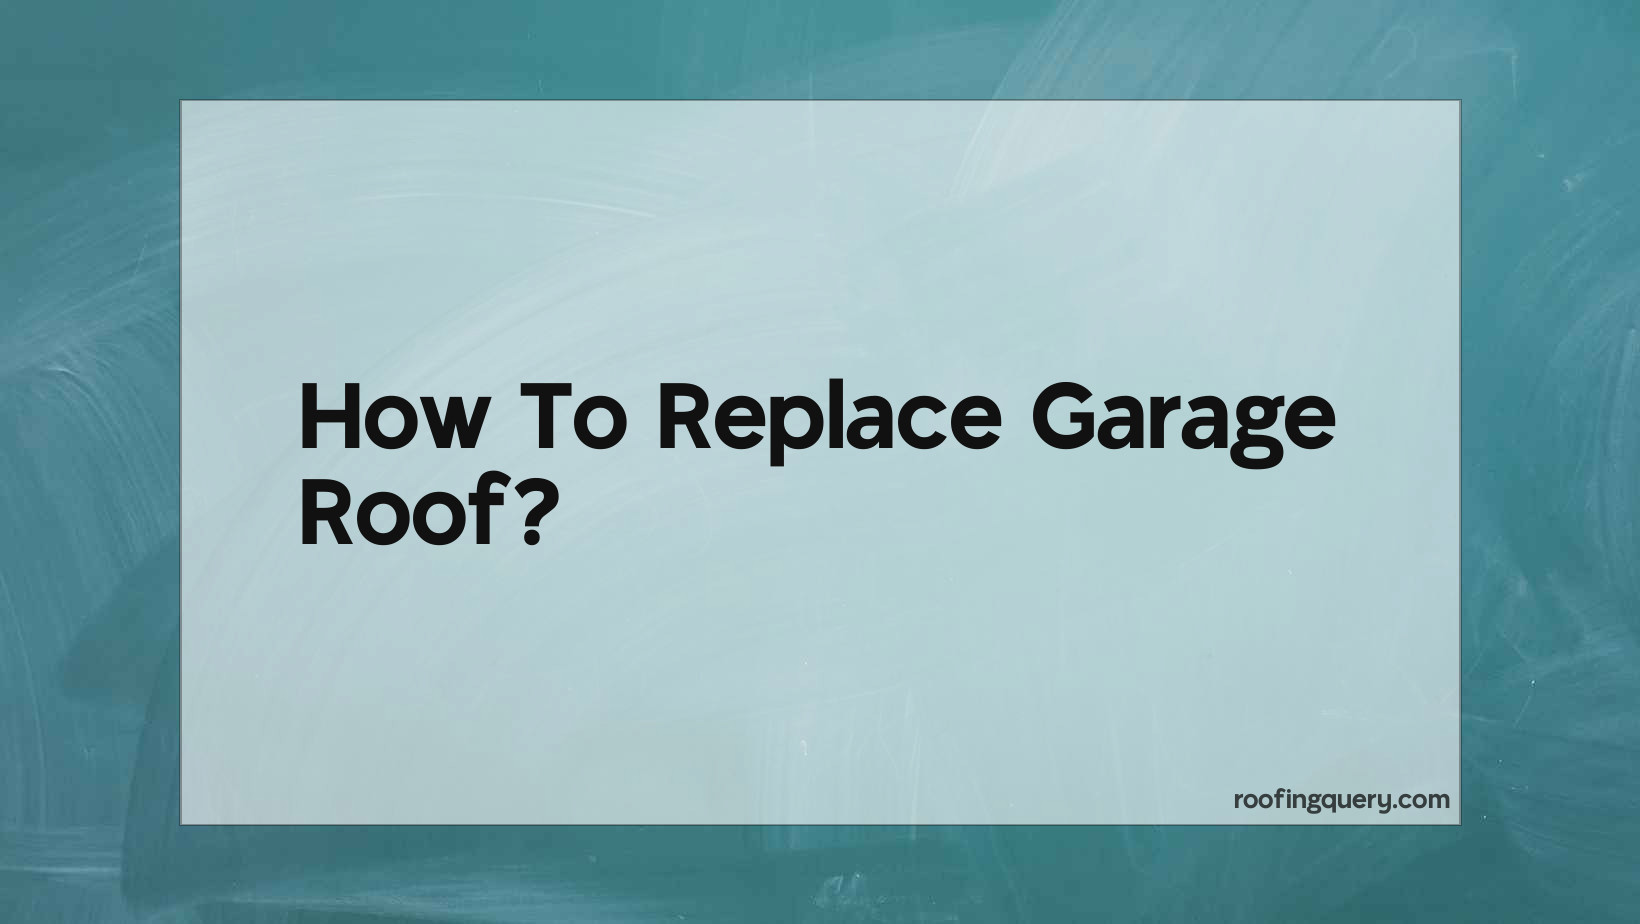 How To Replace Garage Roof